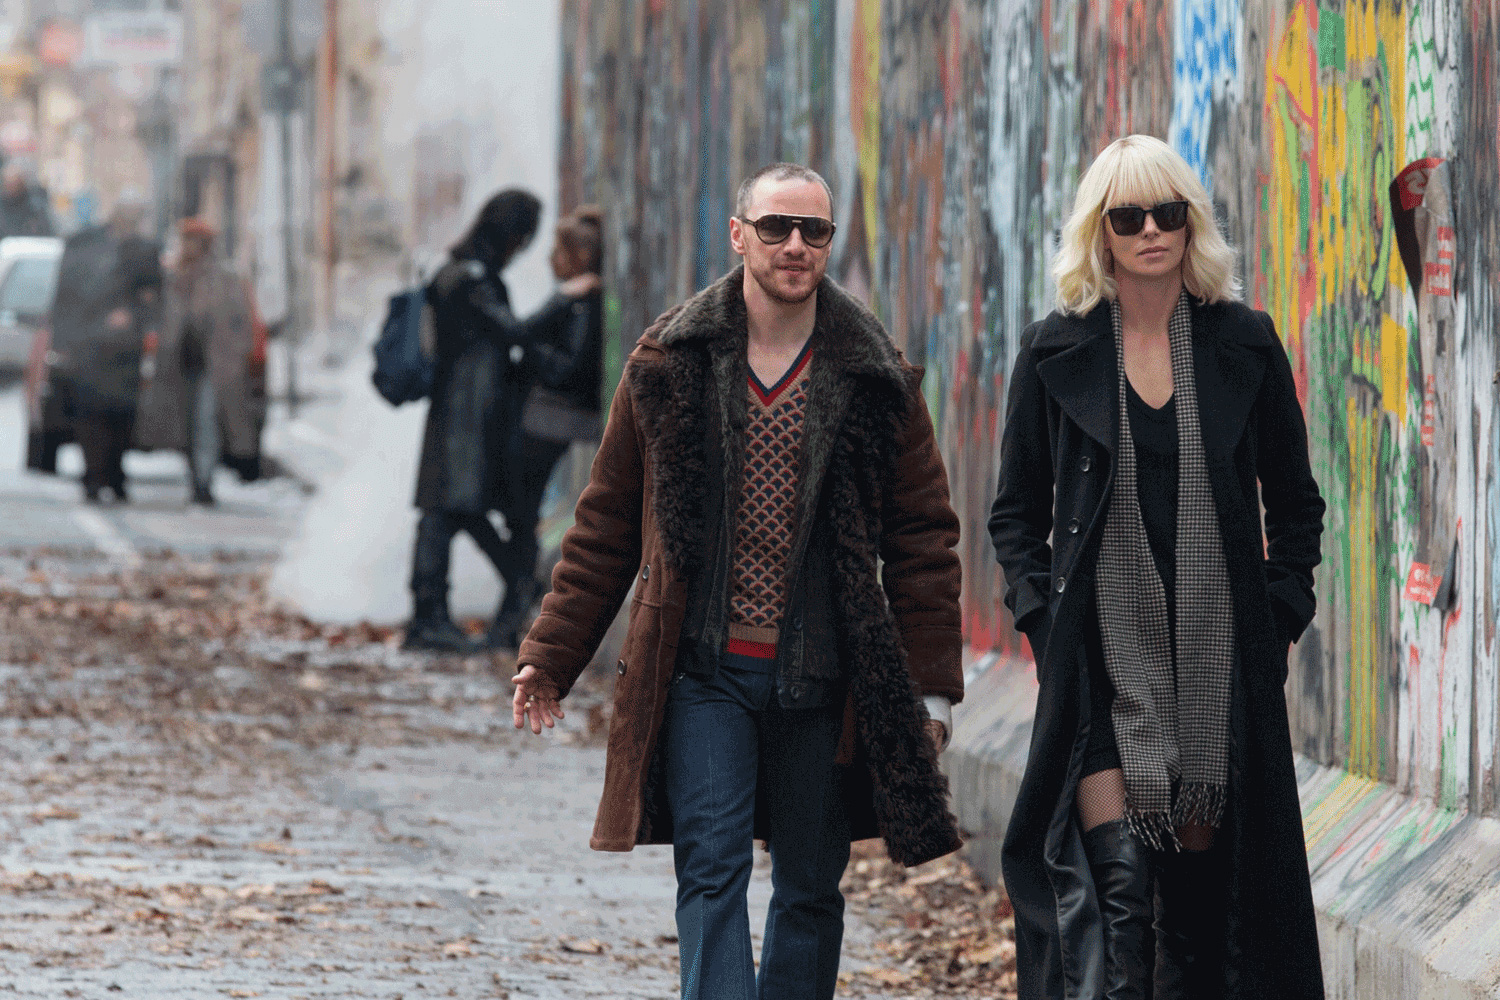 James McAvoy and Charlize Theron making freezing temperatures look sexy in Atomic Blonde. Image via .digitaltrends.com | Atomic Blonde movie review | onetakekate.com